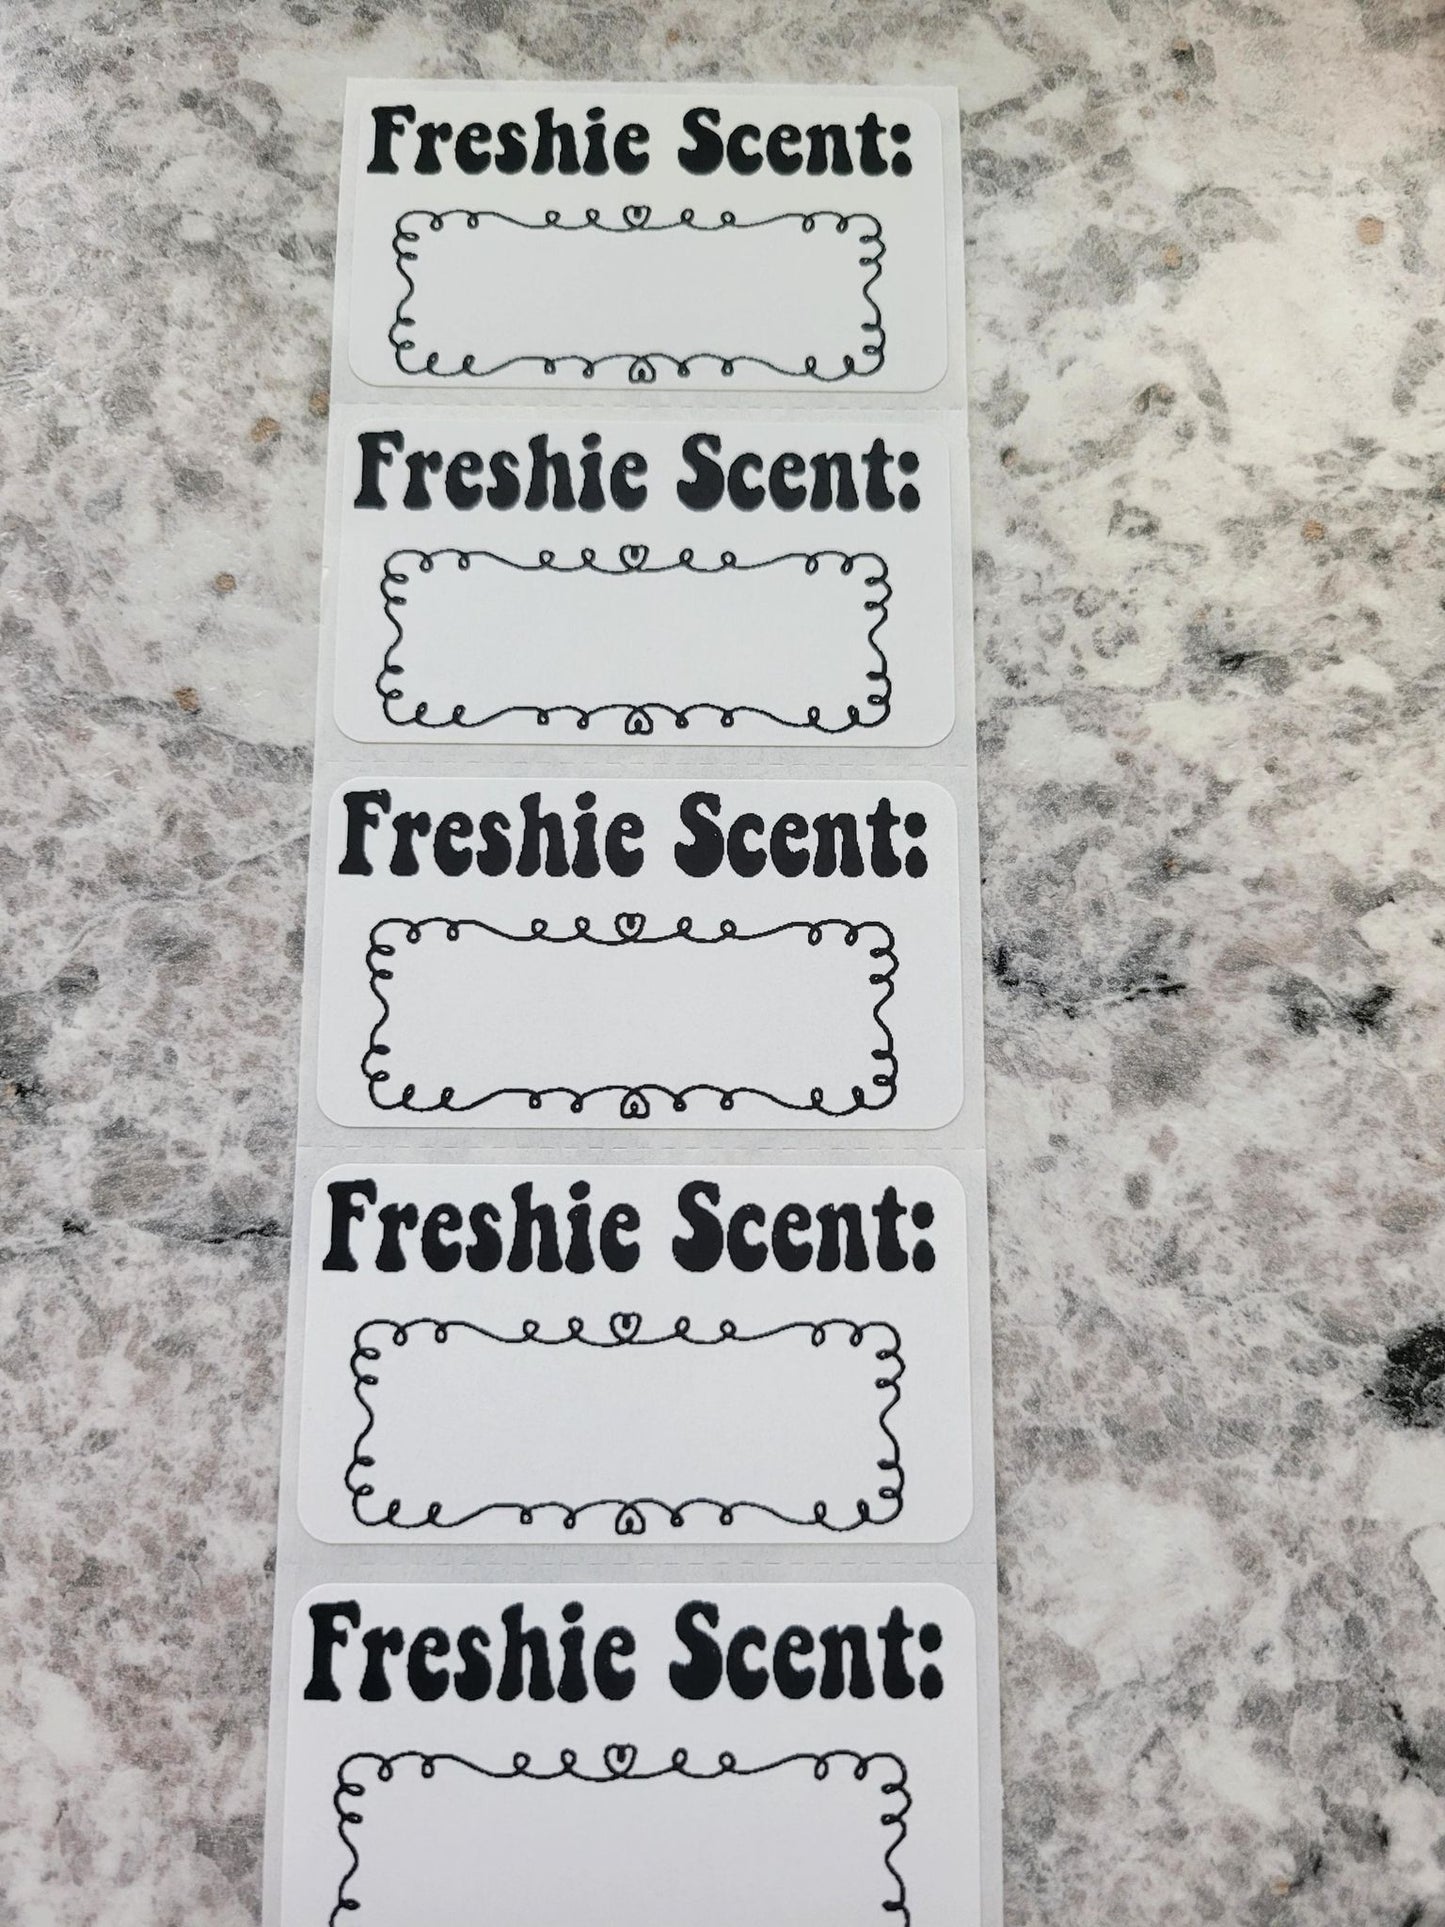 Freshie scent 50 OR 100 count